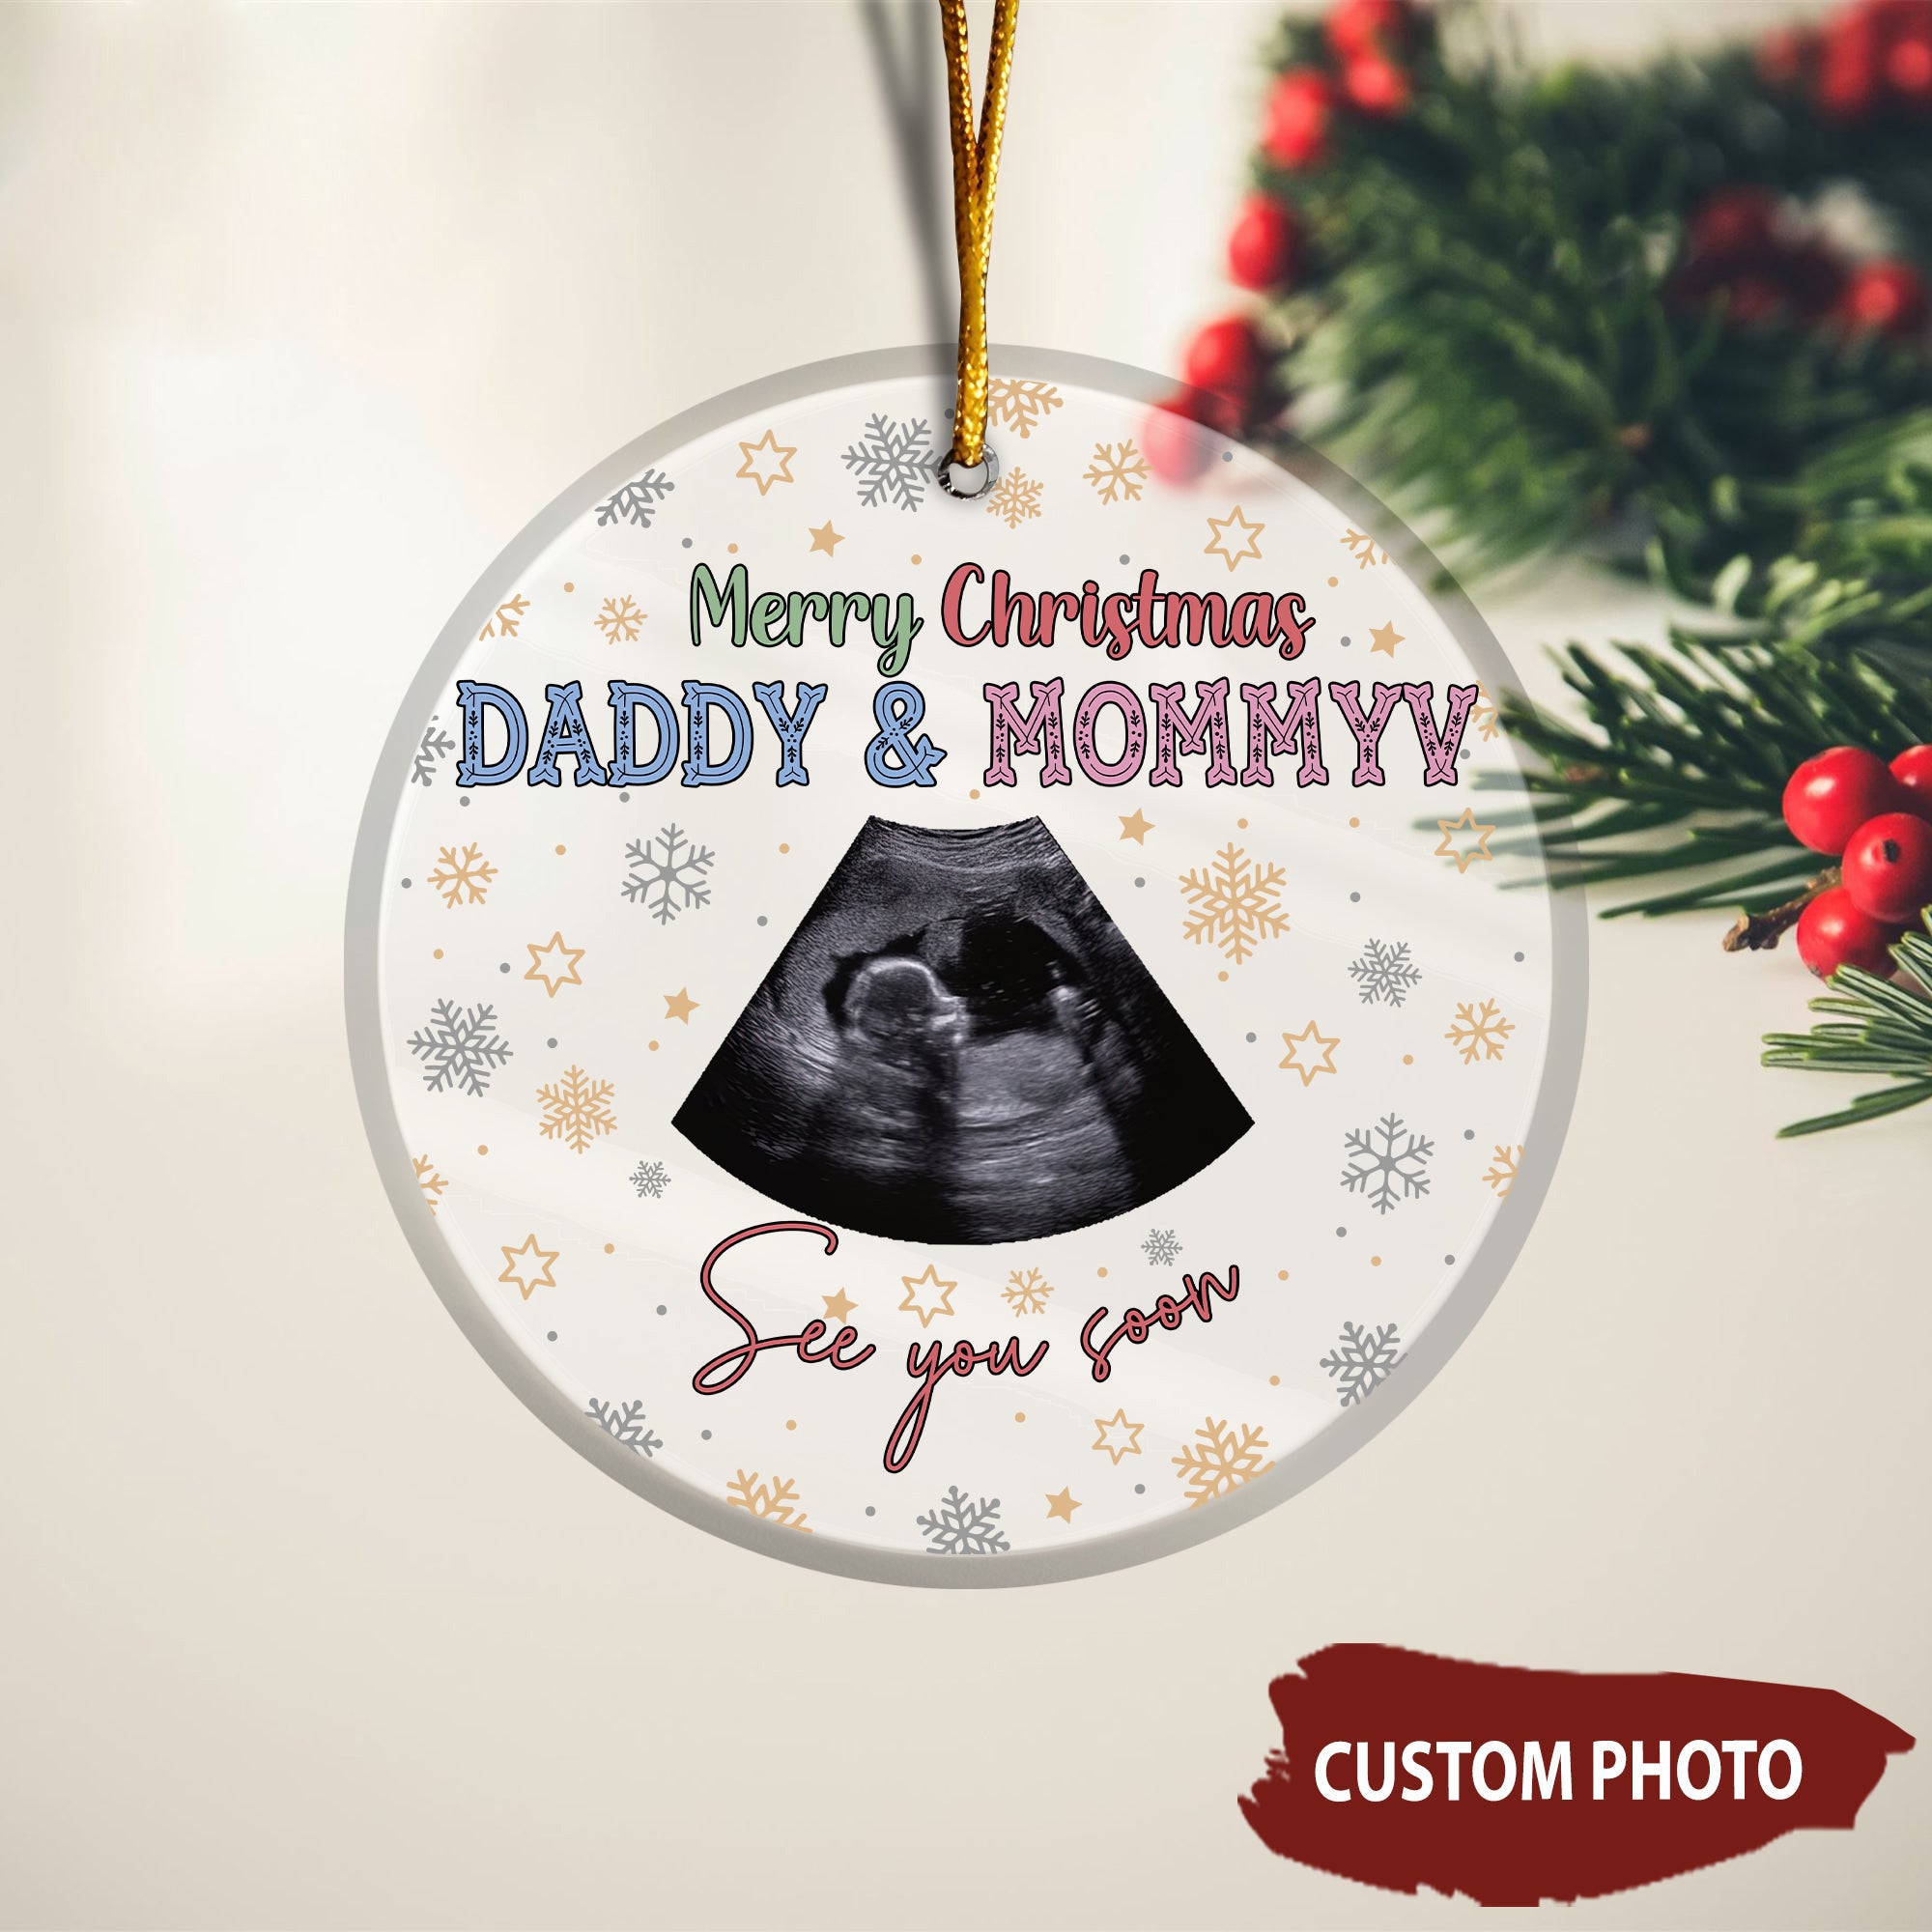 Personalized Gift Of Future Daddy & Mommy See You Soon Ornament